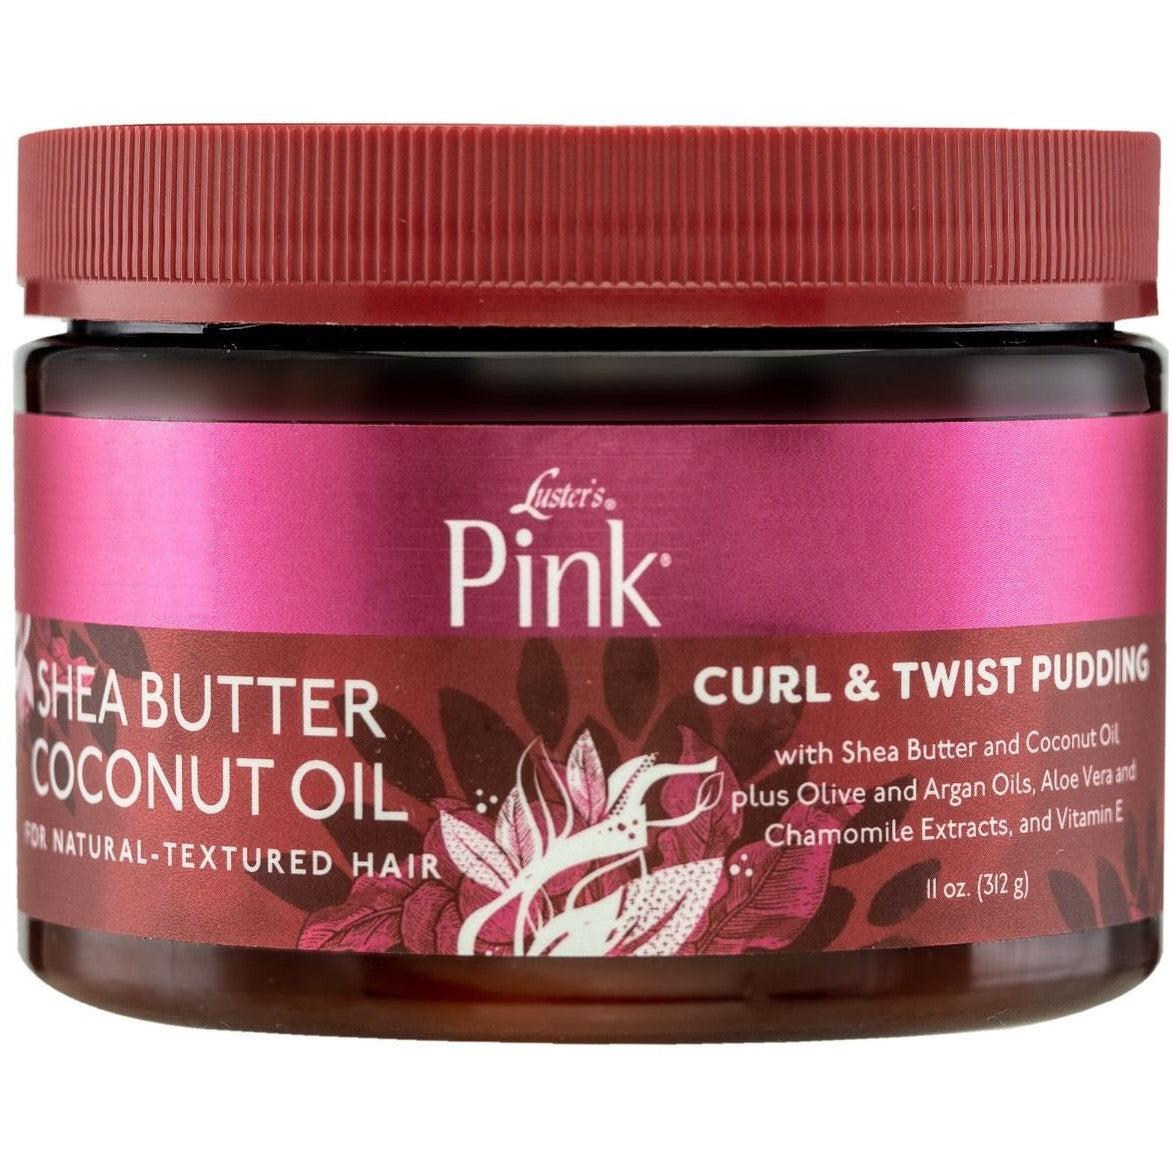 Pink Shea Butter Coconut Oil Curl & Twist Pudding 11 oz